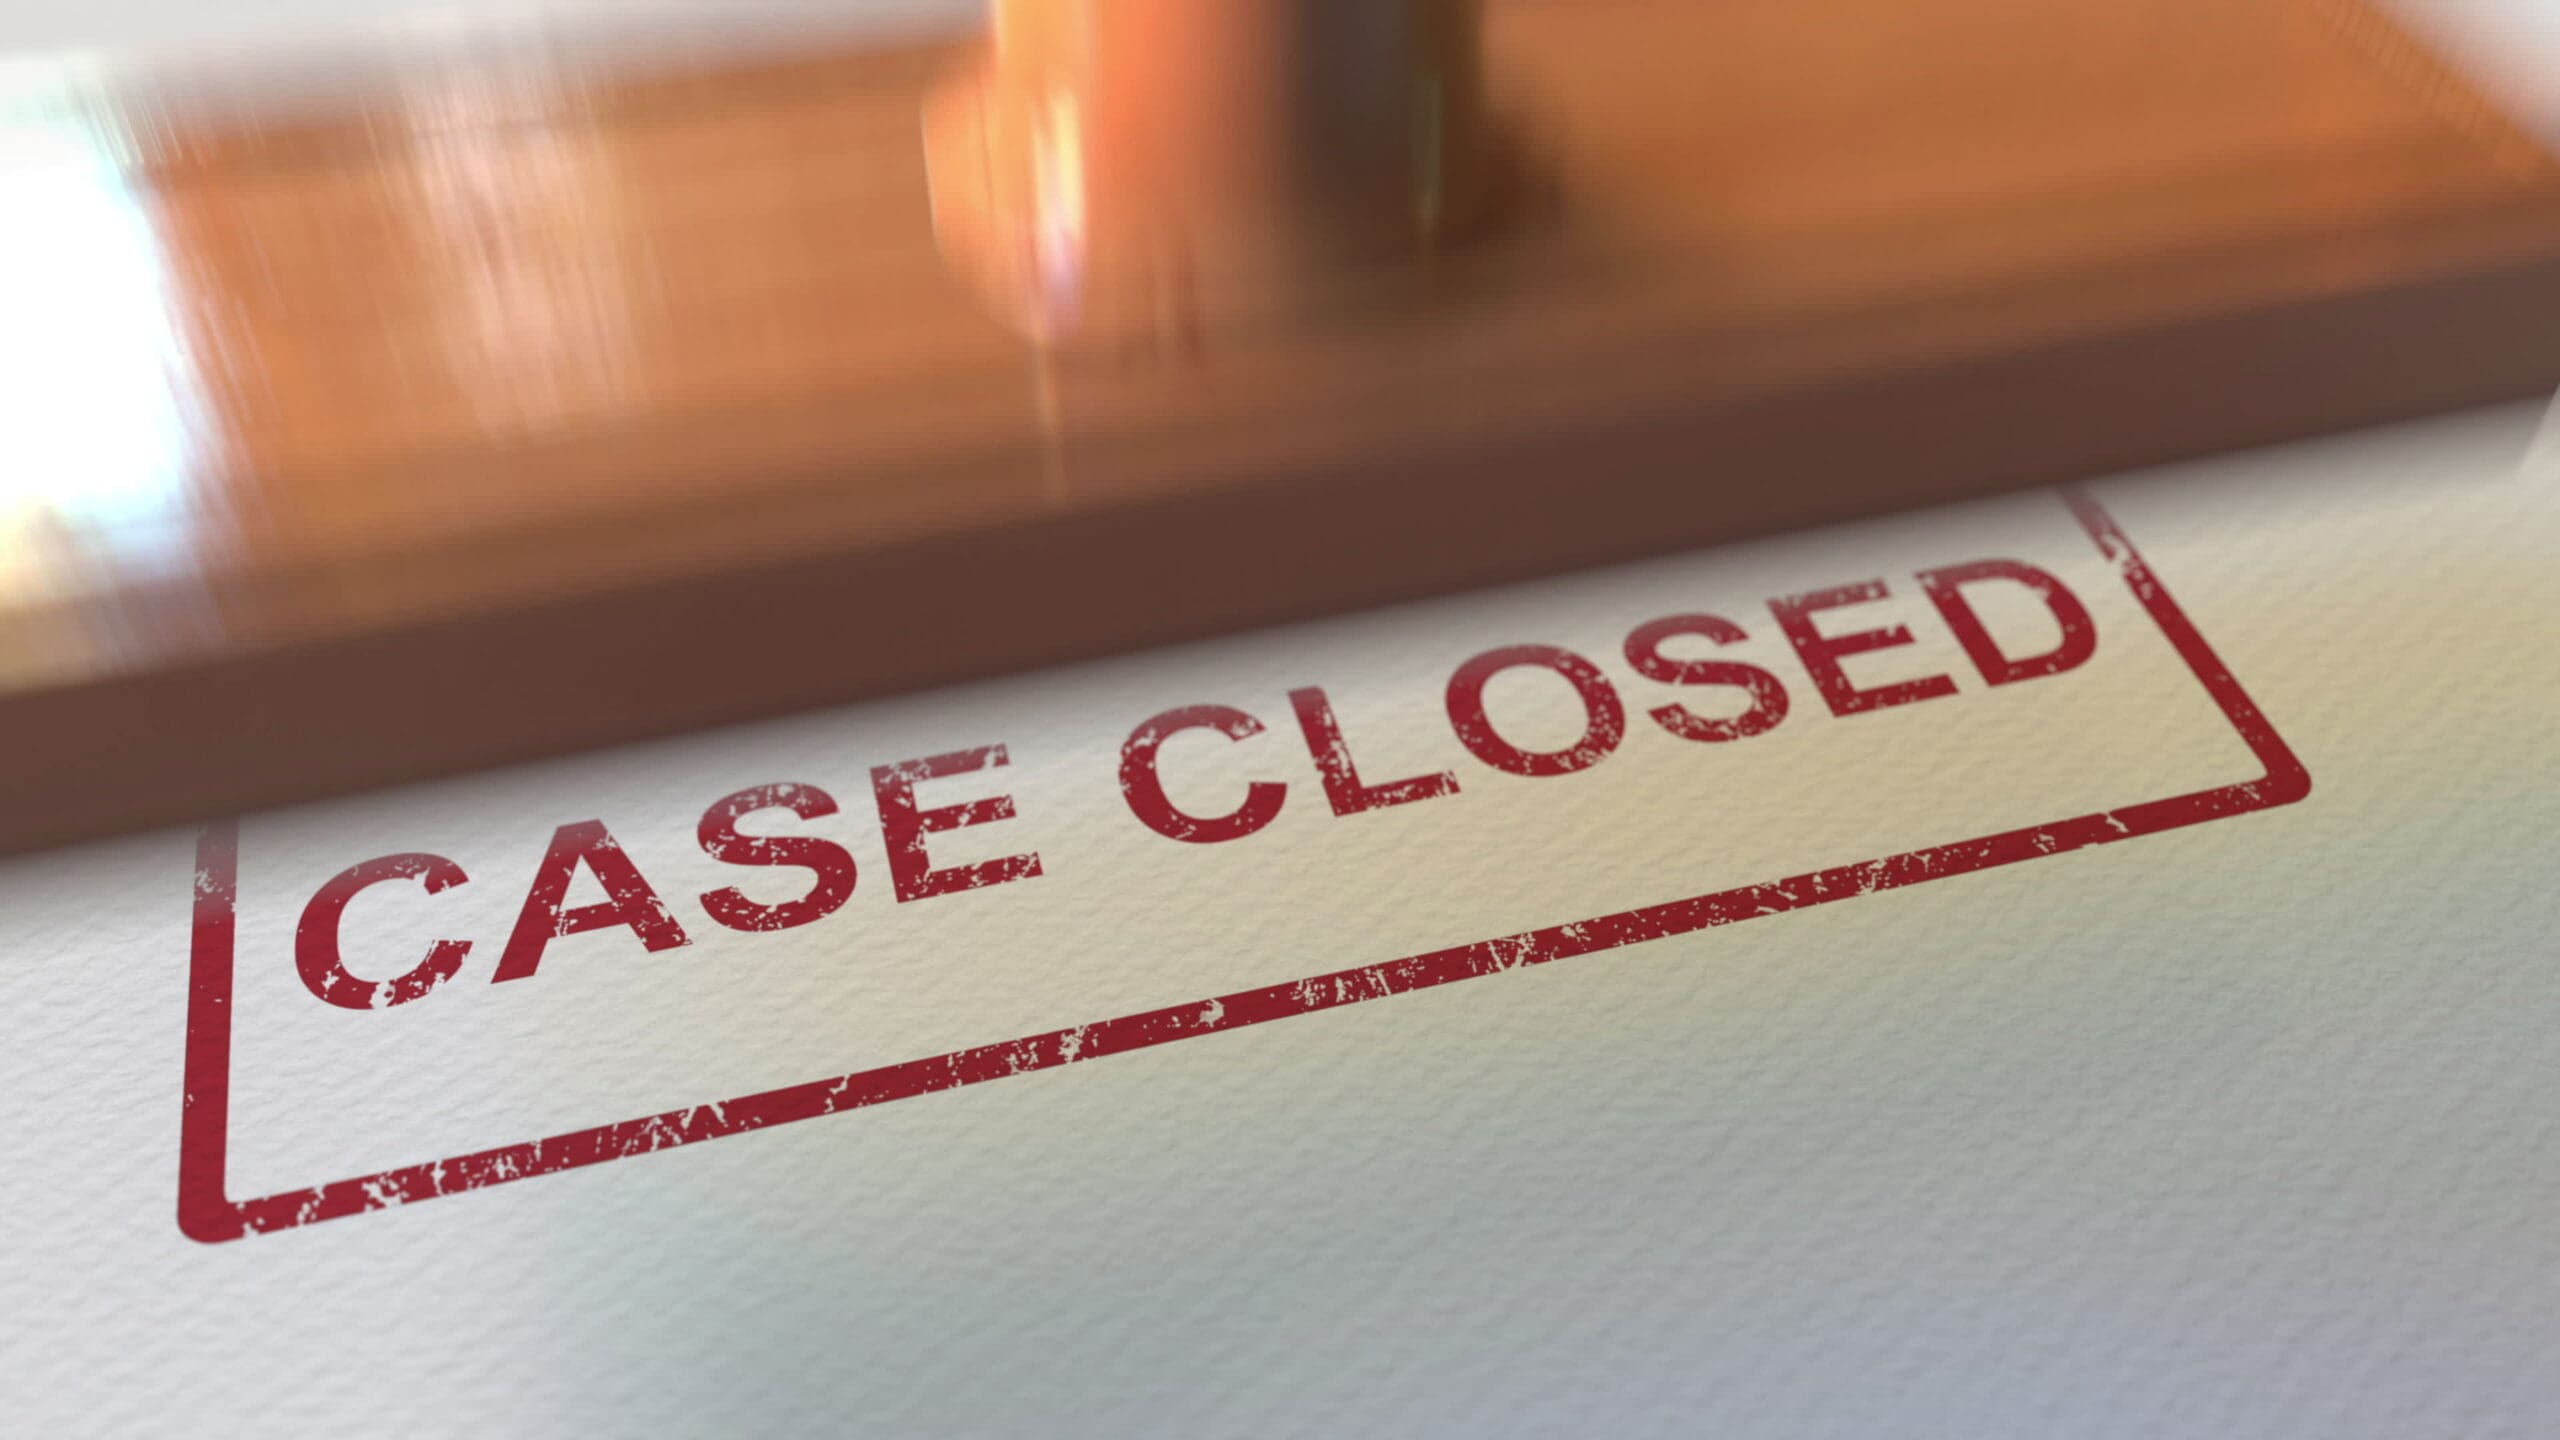 A close-up image of a rubber stamp marked "CASE CLOSED" in red ink on a piece of paper. The stamp is slightly worn, giving a slightly textured appearance to the text. The background is a plain, white surface.